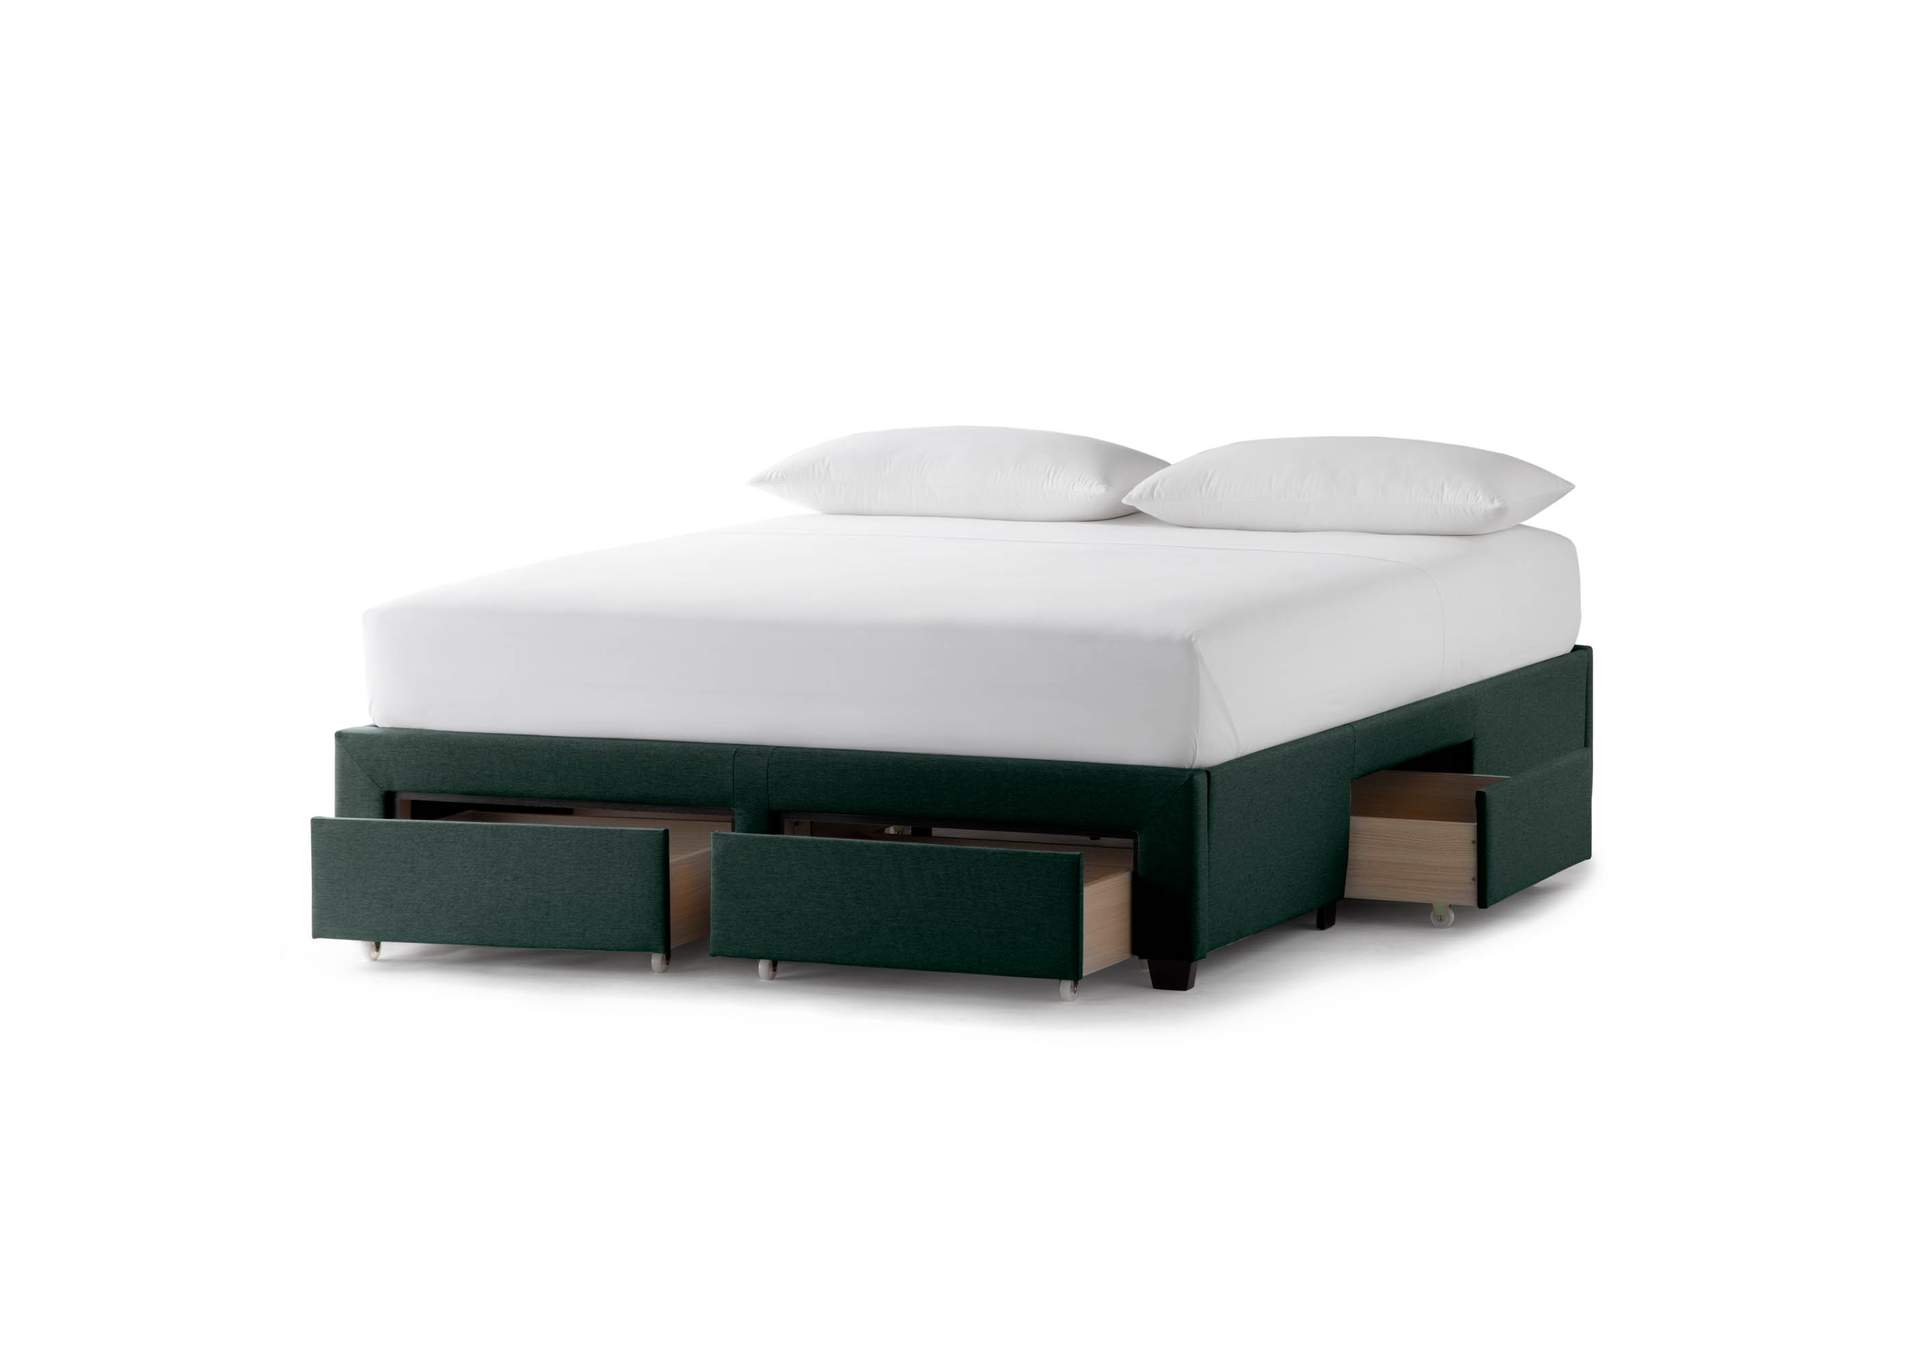 Malouf Charcoal Watson Upholstered Platform Queen Bed,Malouf